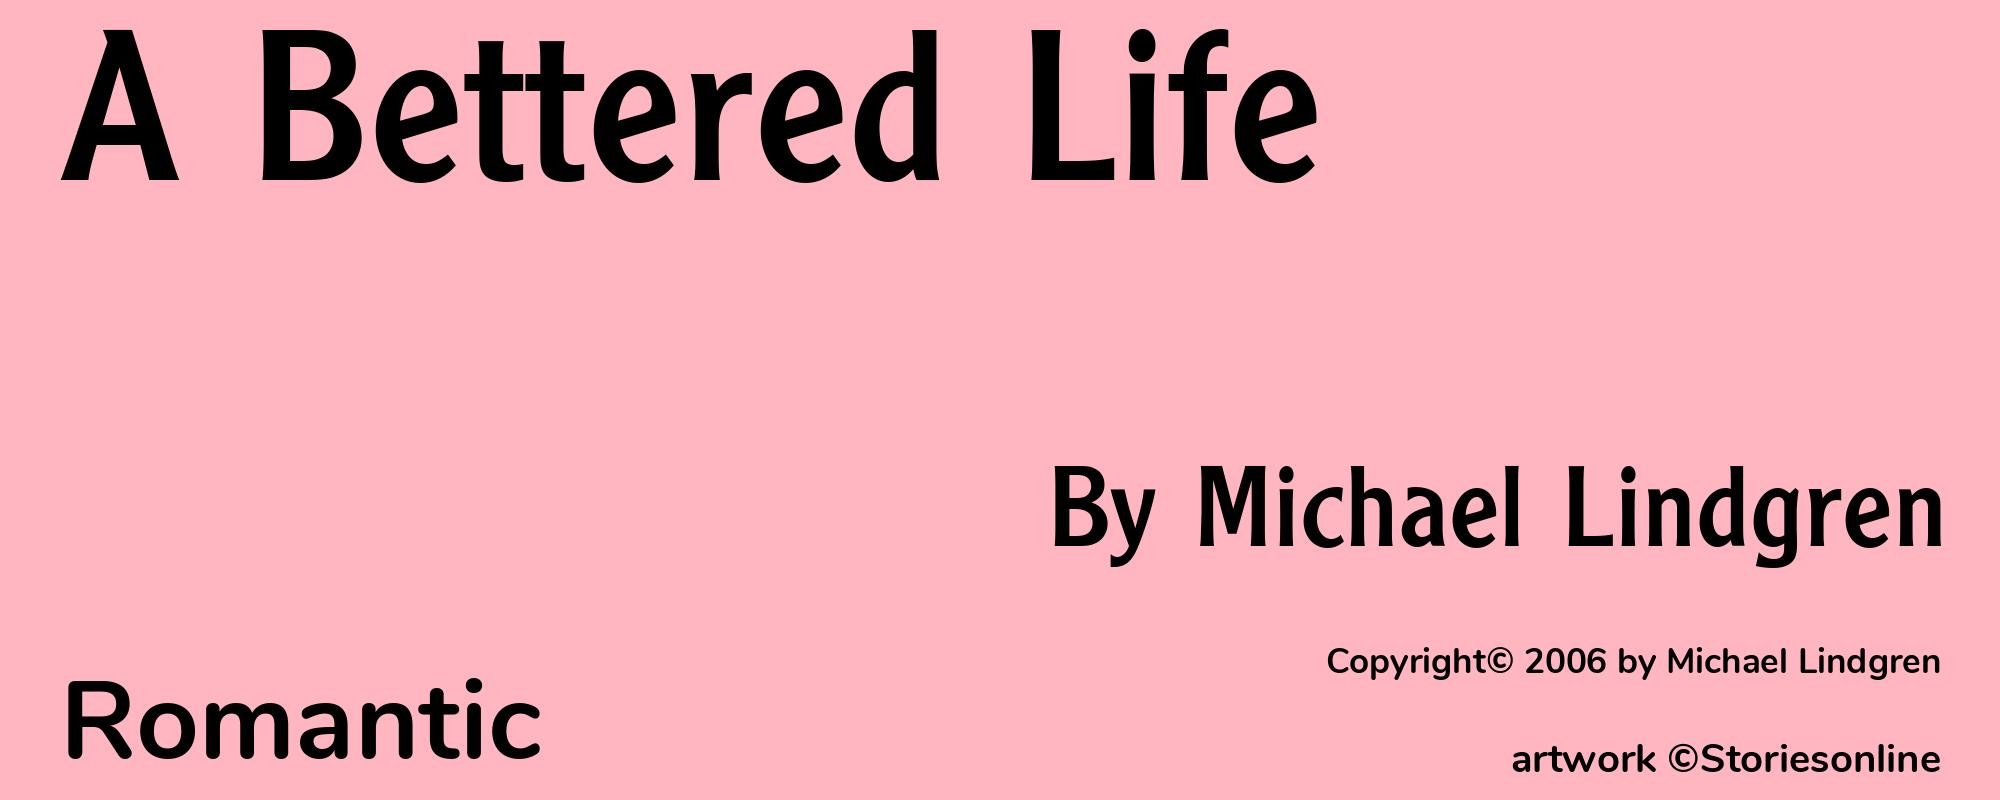 A Bettered Life - Cover